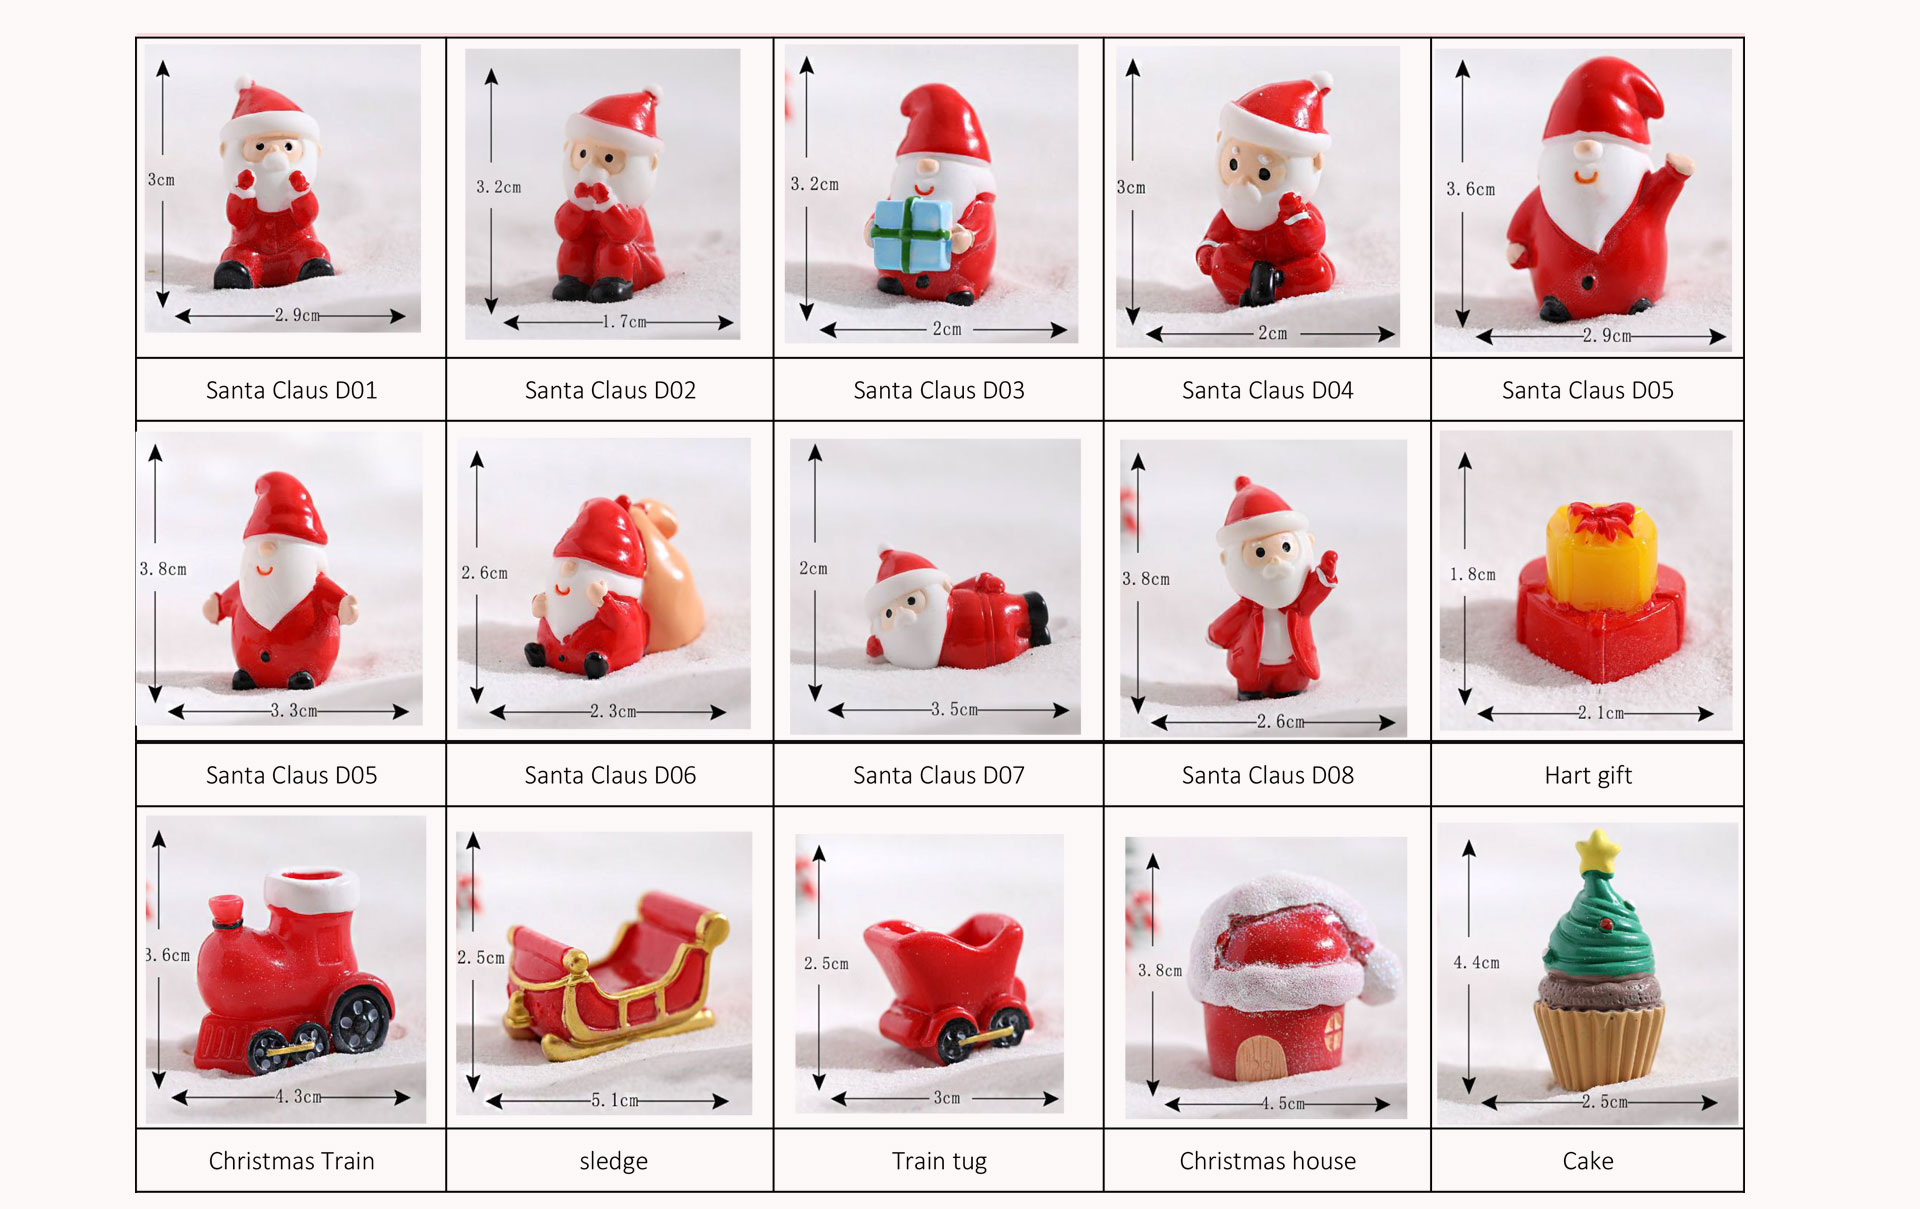 The Idea of Christmas-Themed Dig Kits for Holiday Cheer